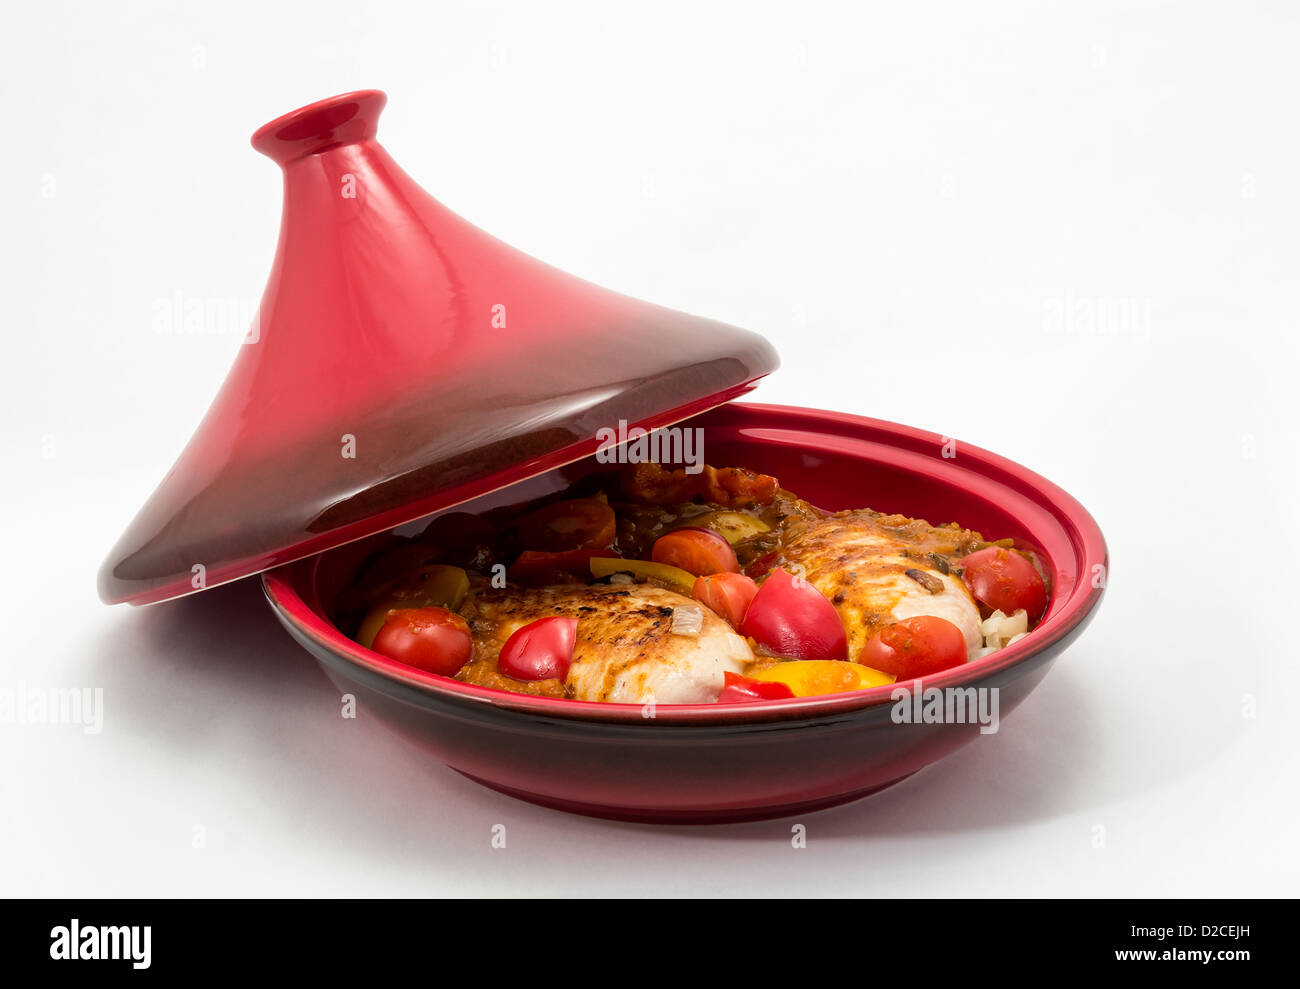 Tagine (Tajine) a type of cookware from Morocco shown here with a prepared chicken dish ready for cooking. Stock Photo